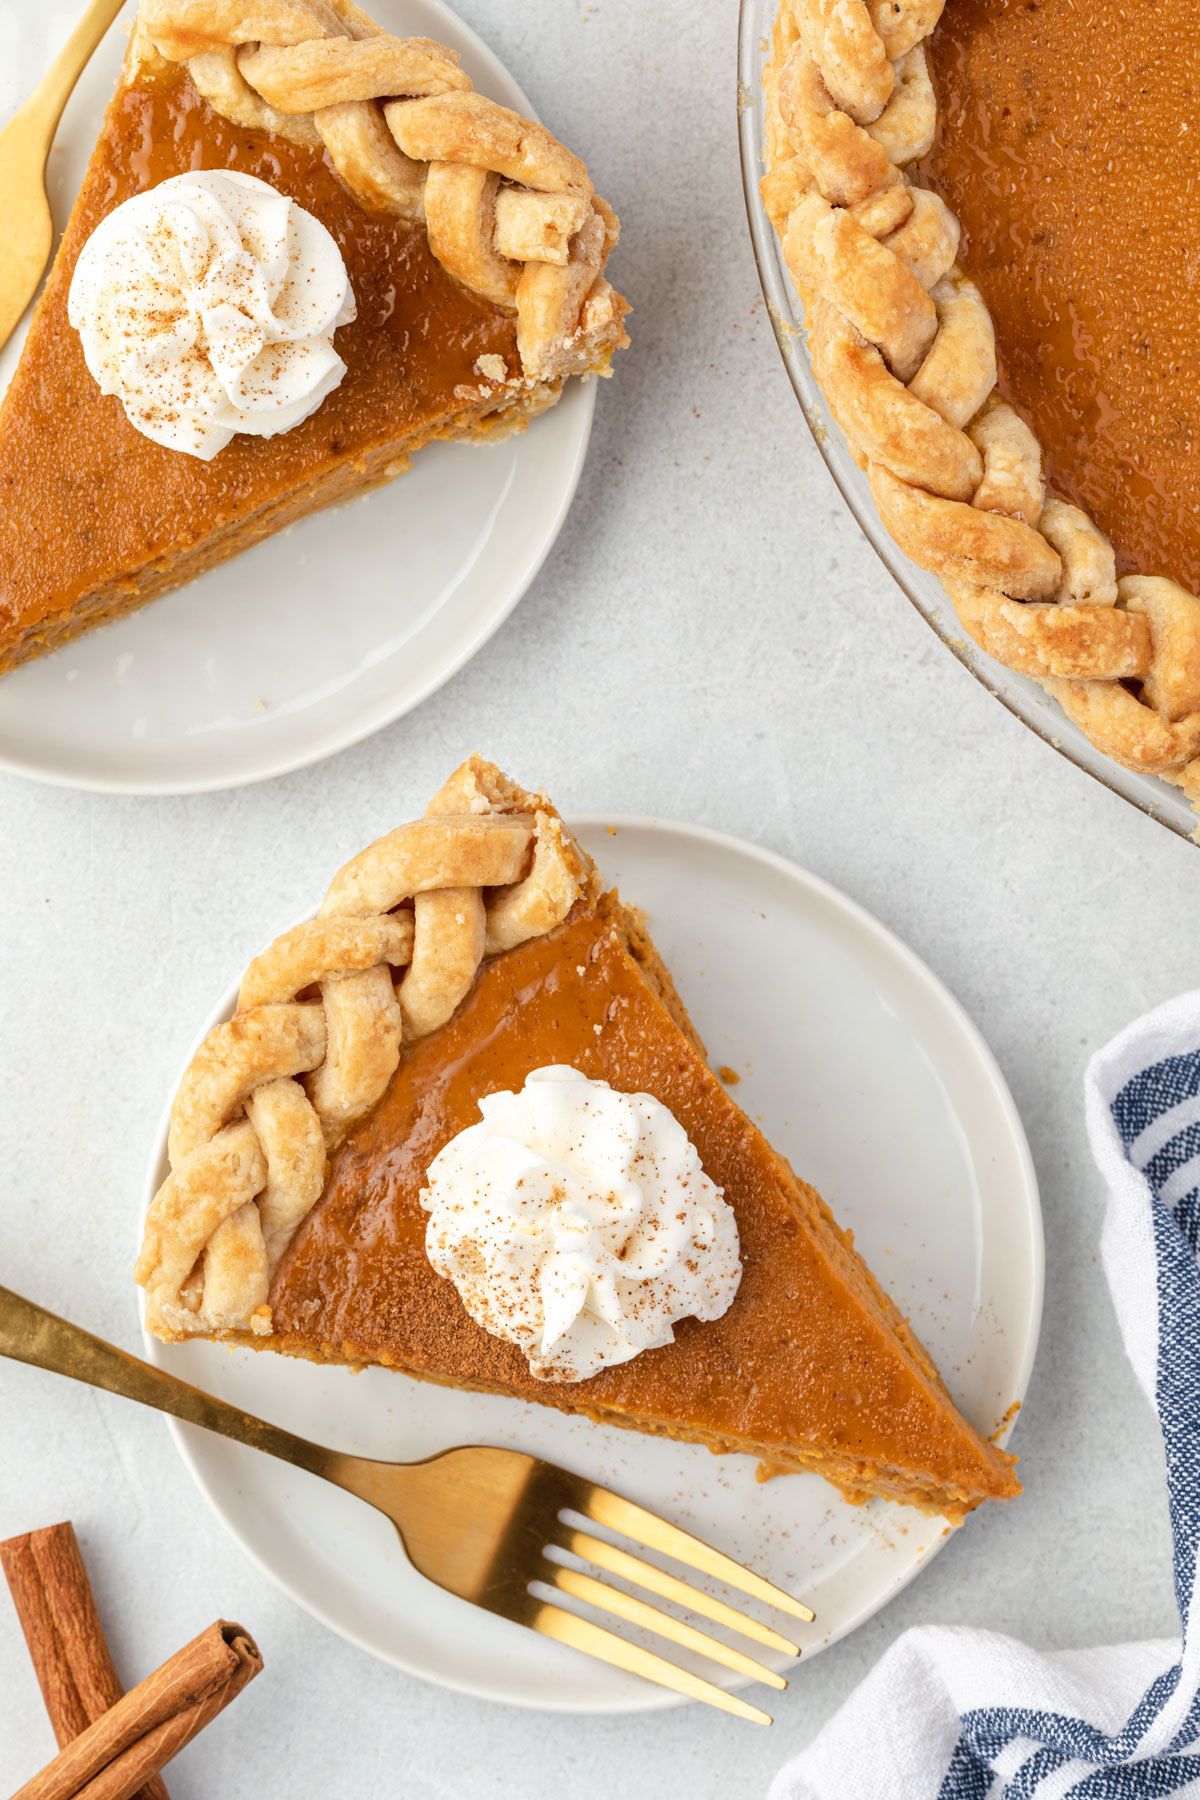 Slice of pumpkin pie with a braided crust and a dollop of whipped cream with a dusting of pumpkin spice on a plate with a gold fork.